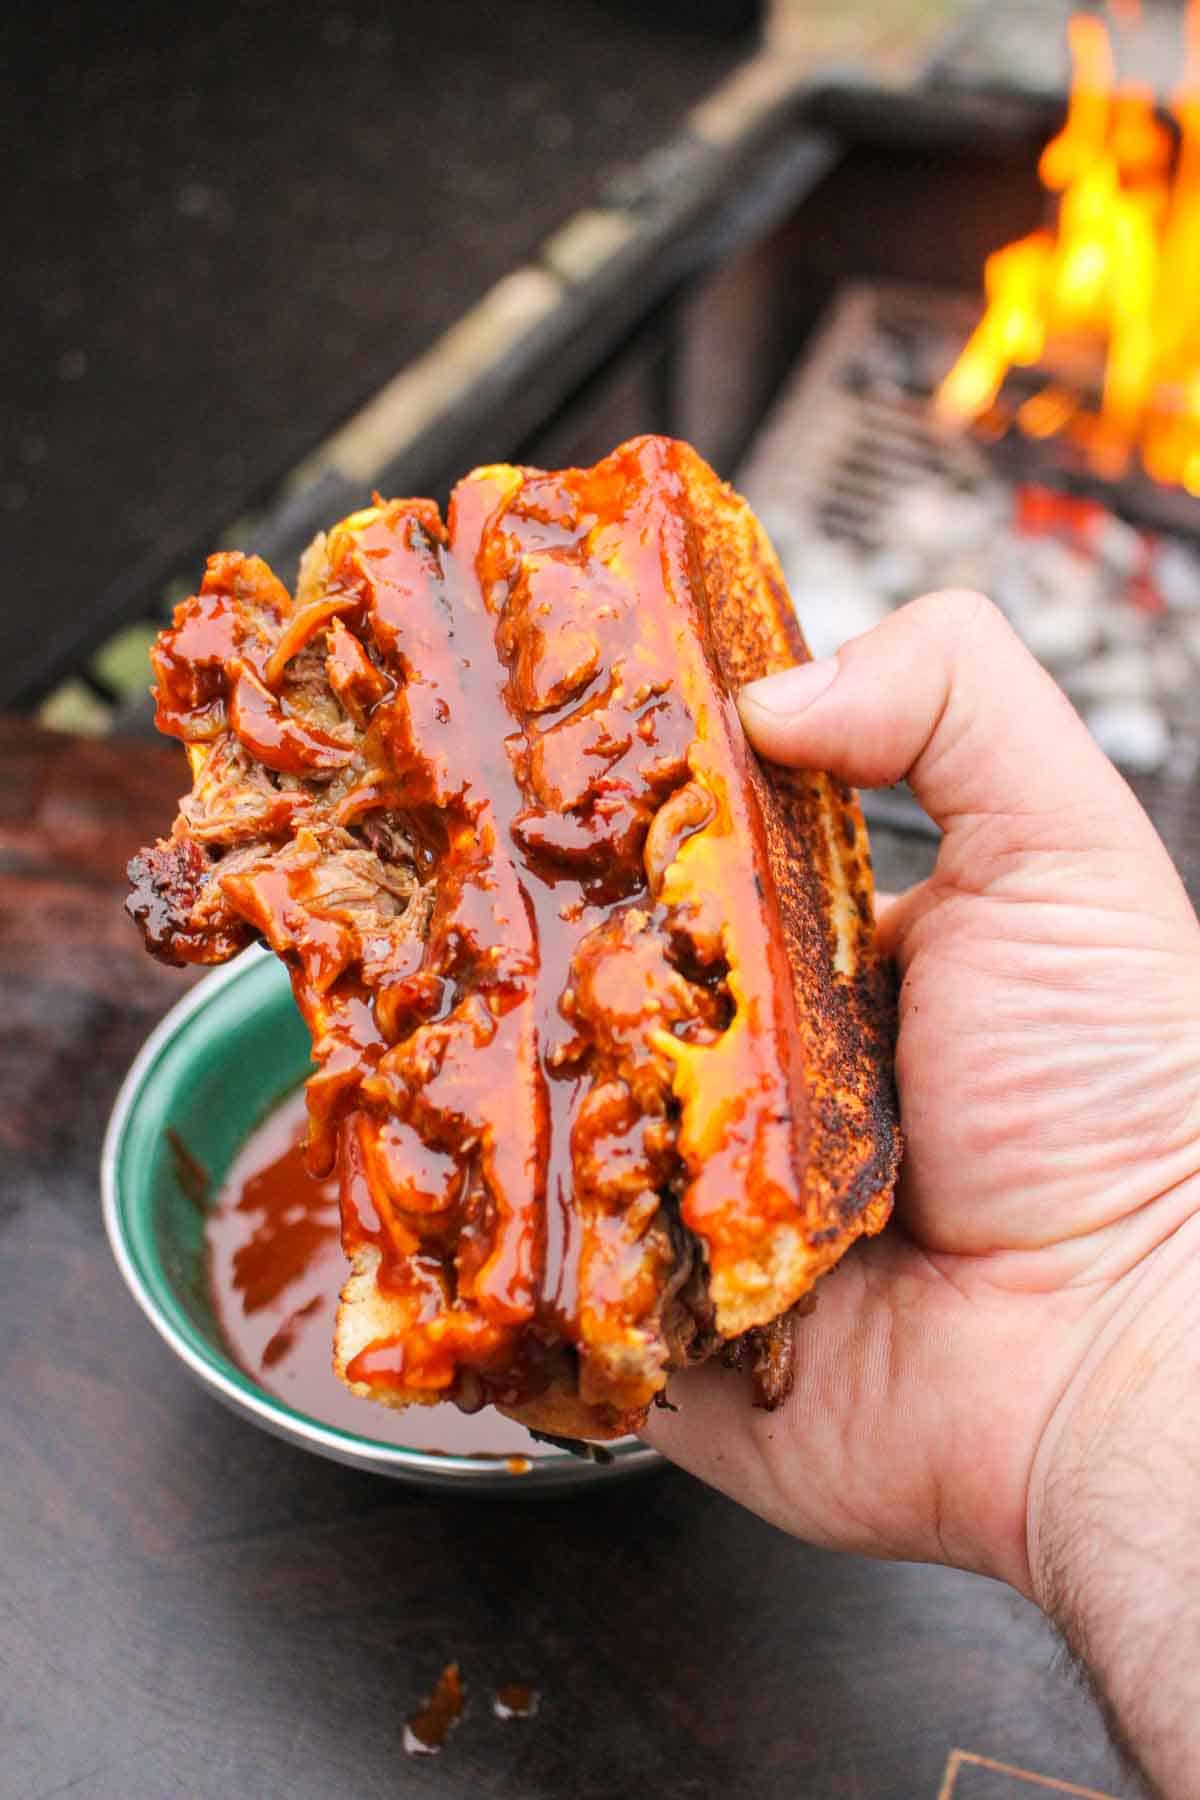 The sandwich is dipped in BBQ sauce. 